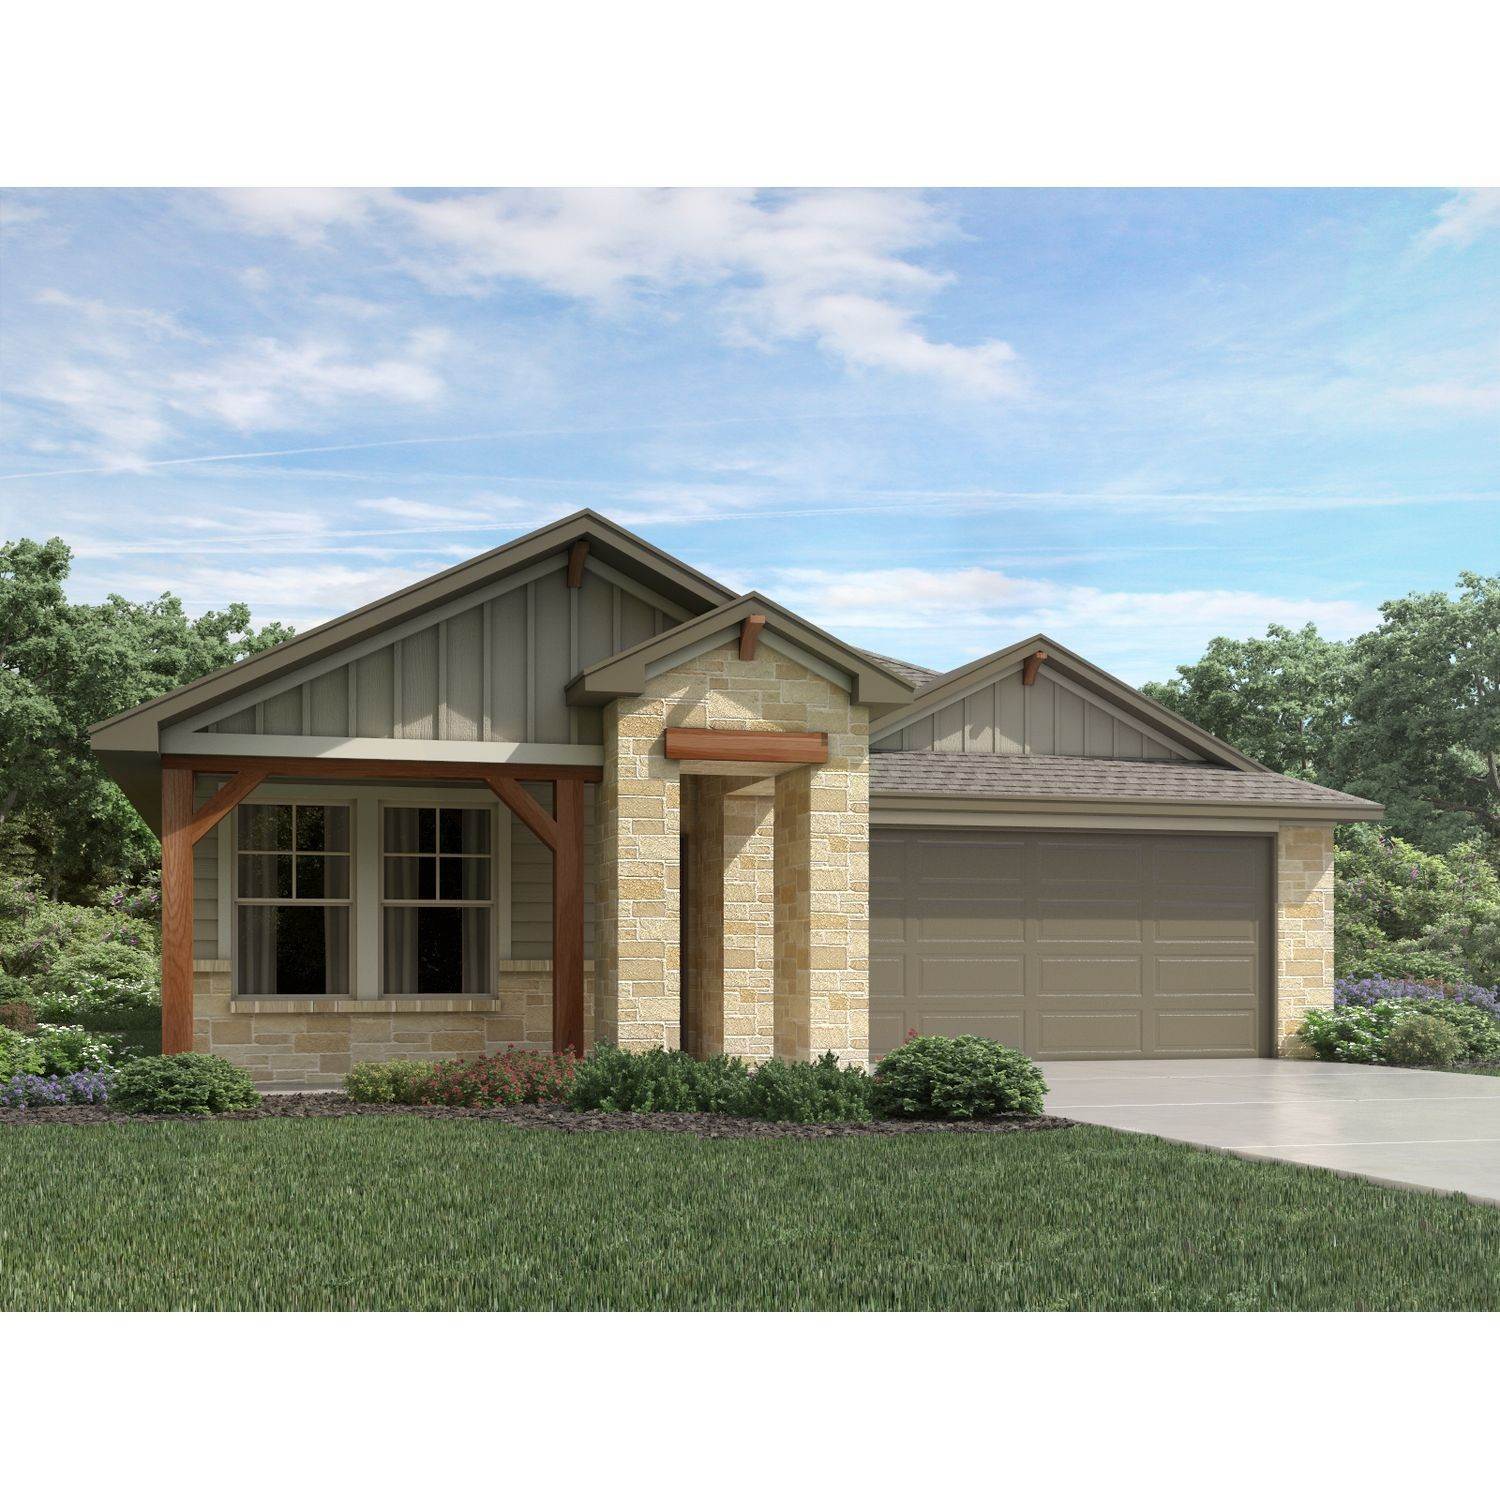 Single Family for Sale at Round Rock, TX 78665